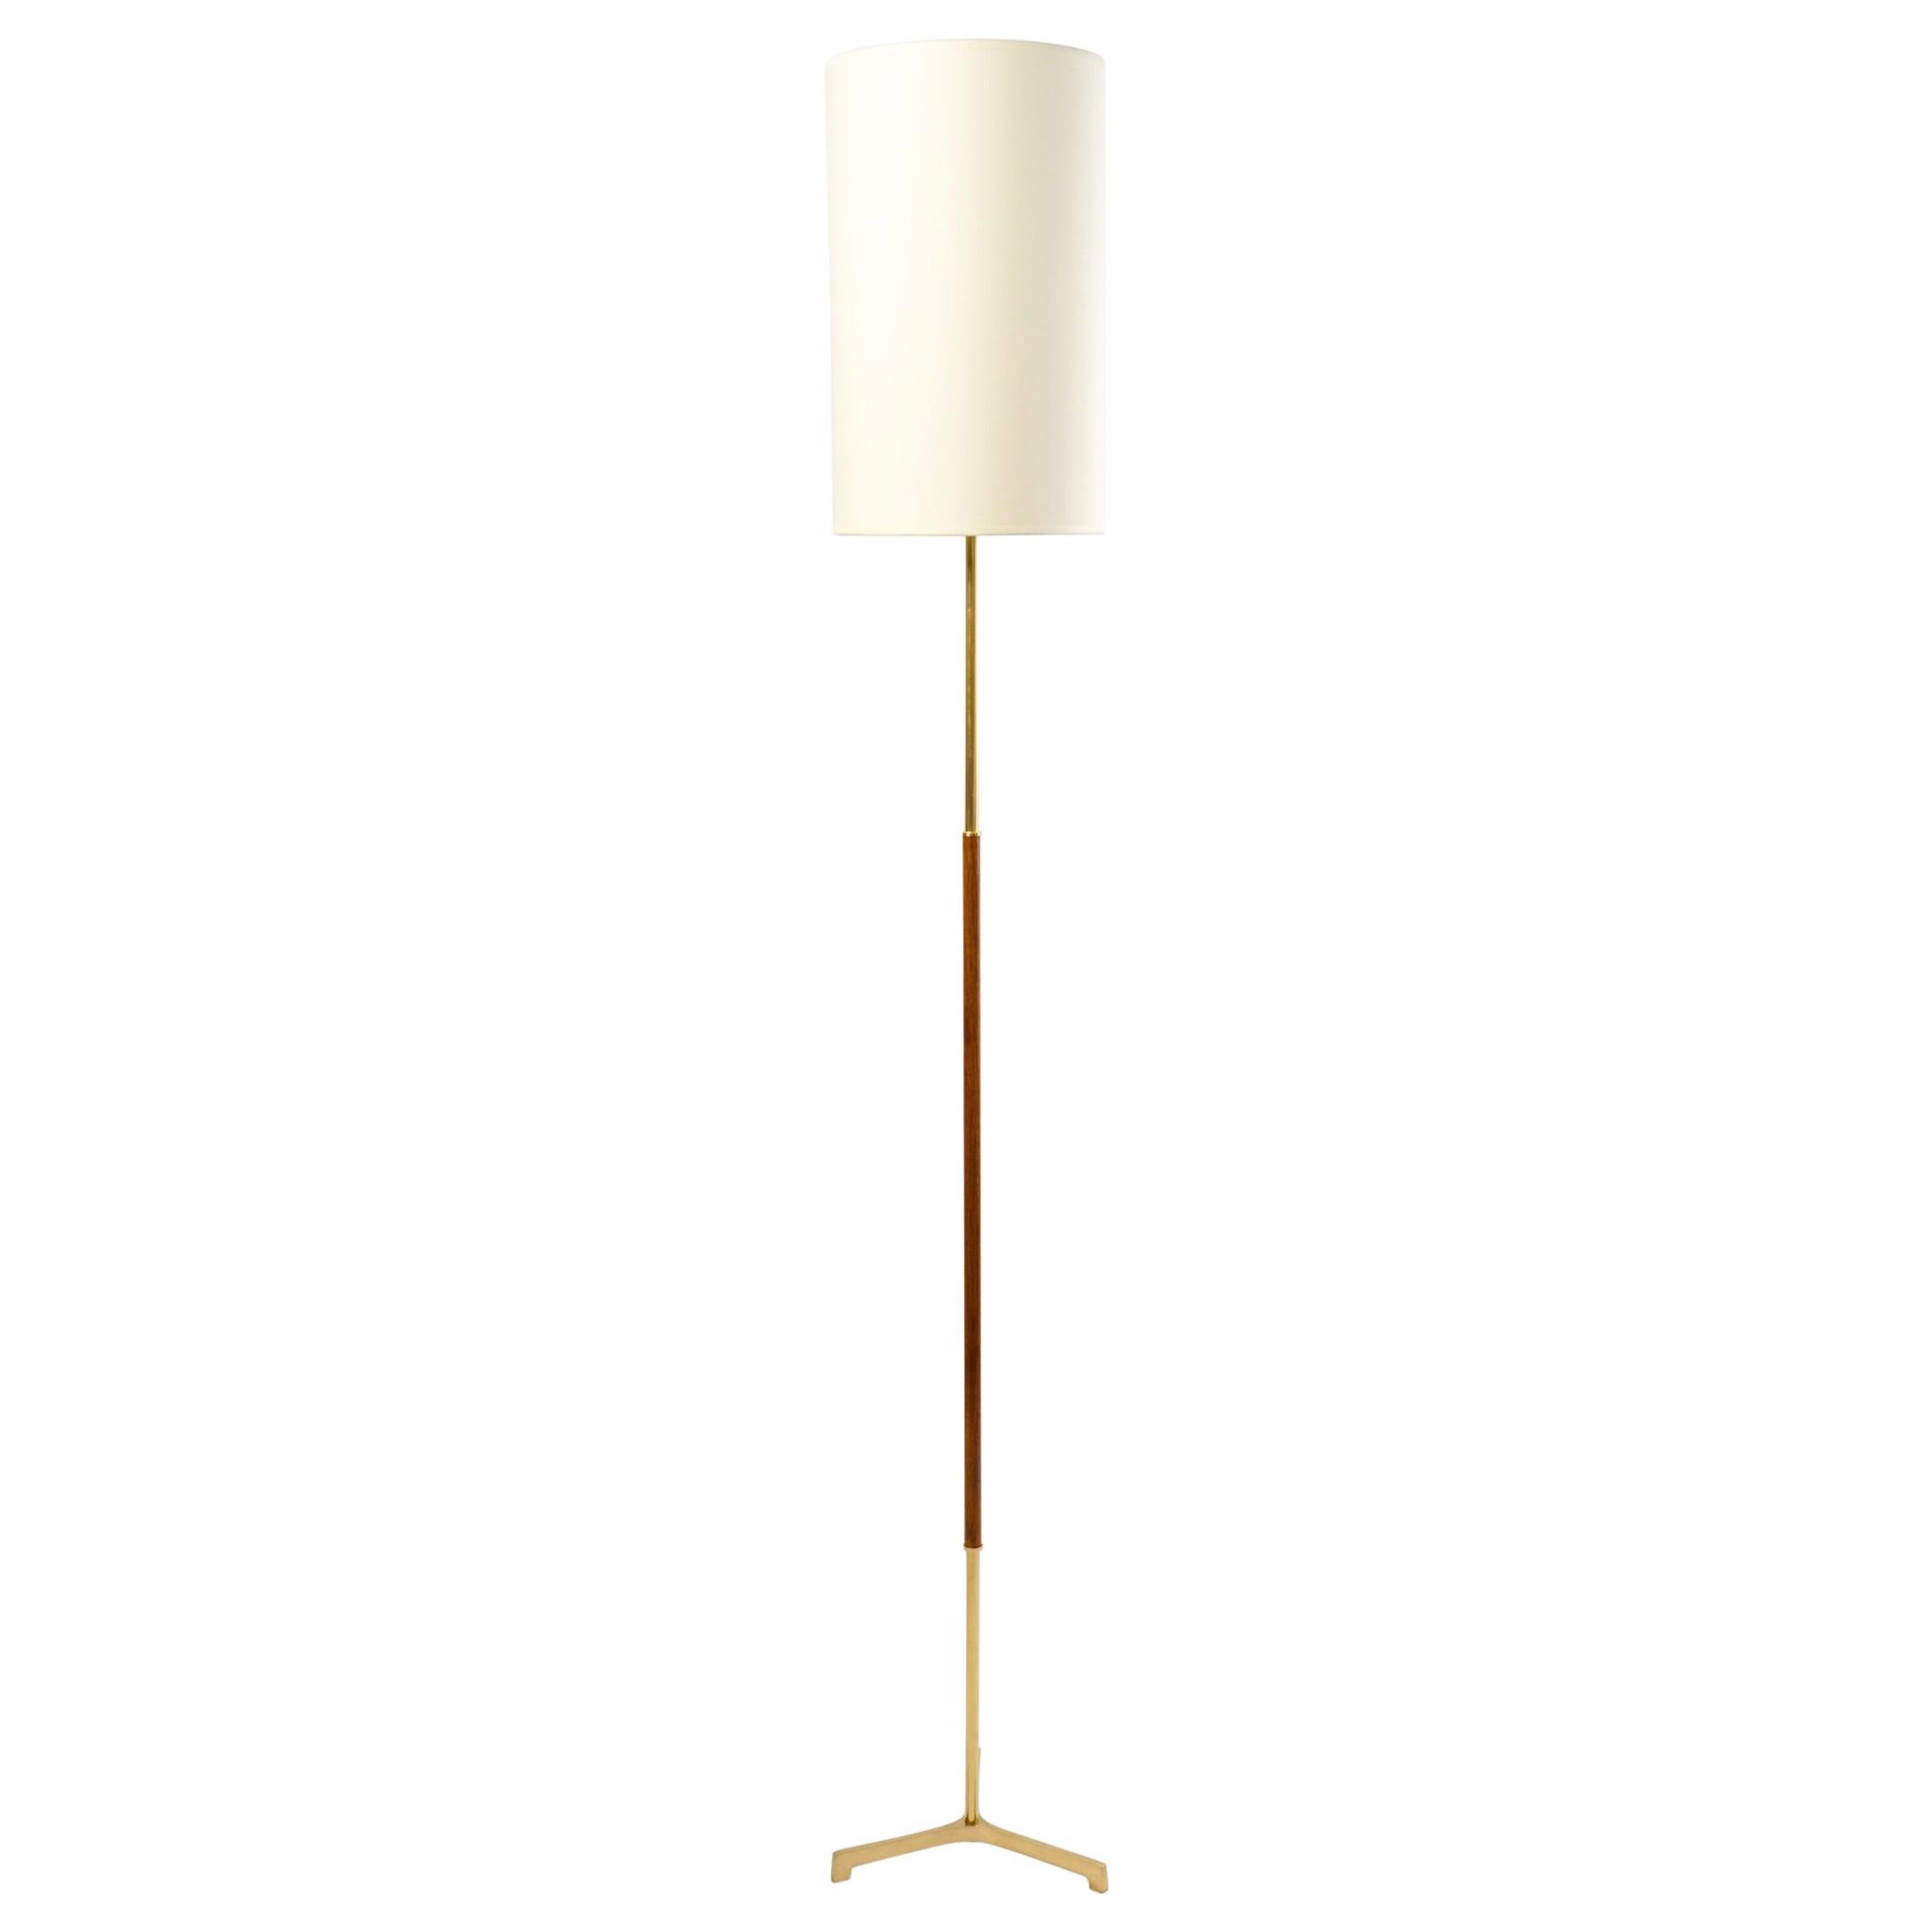 The central rod is embellished with a straight mahogany shaft underlined with gilded brass on the upper and lower part of the rod.
The whole rests on a tripod (3 feet) in gilded brass.
The floor lamp is dressed with a cylindrical lampshade in